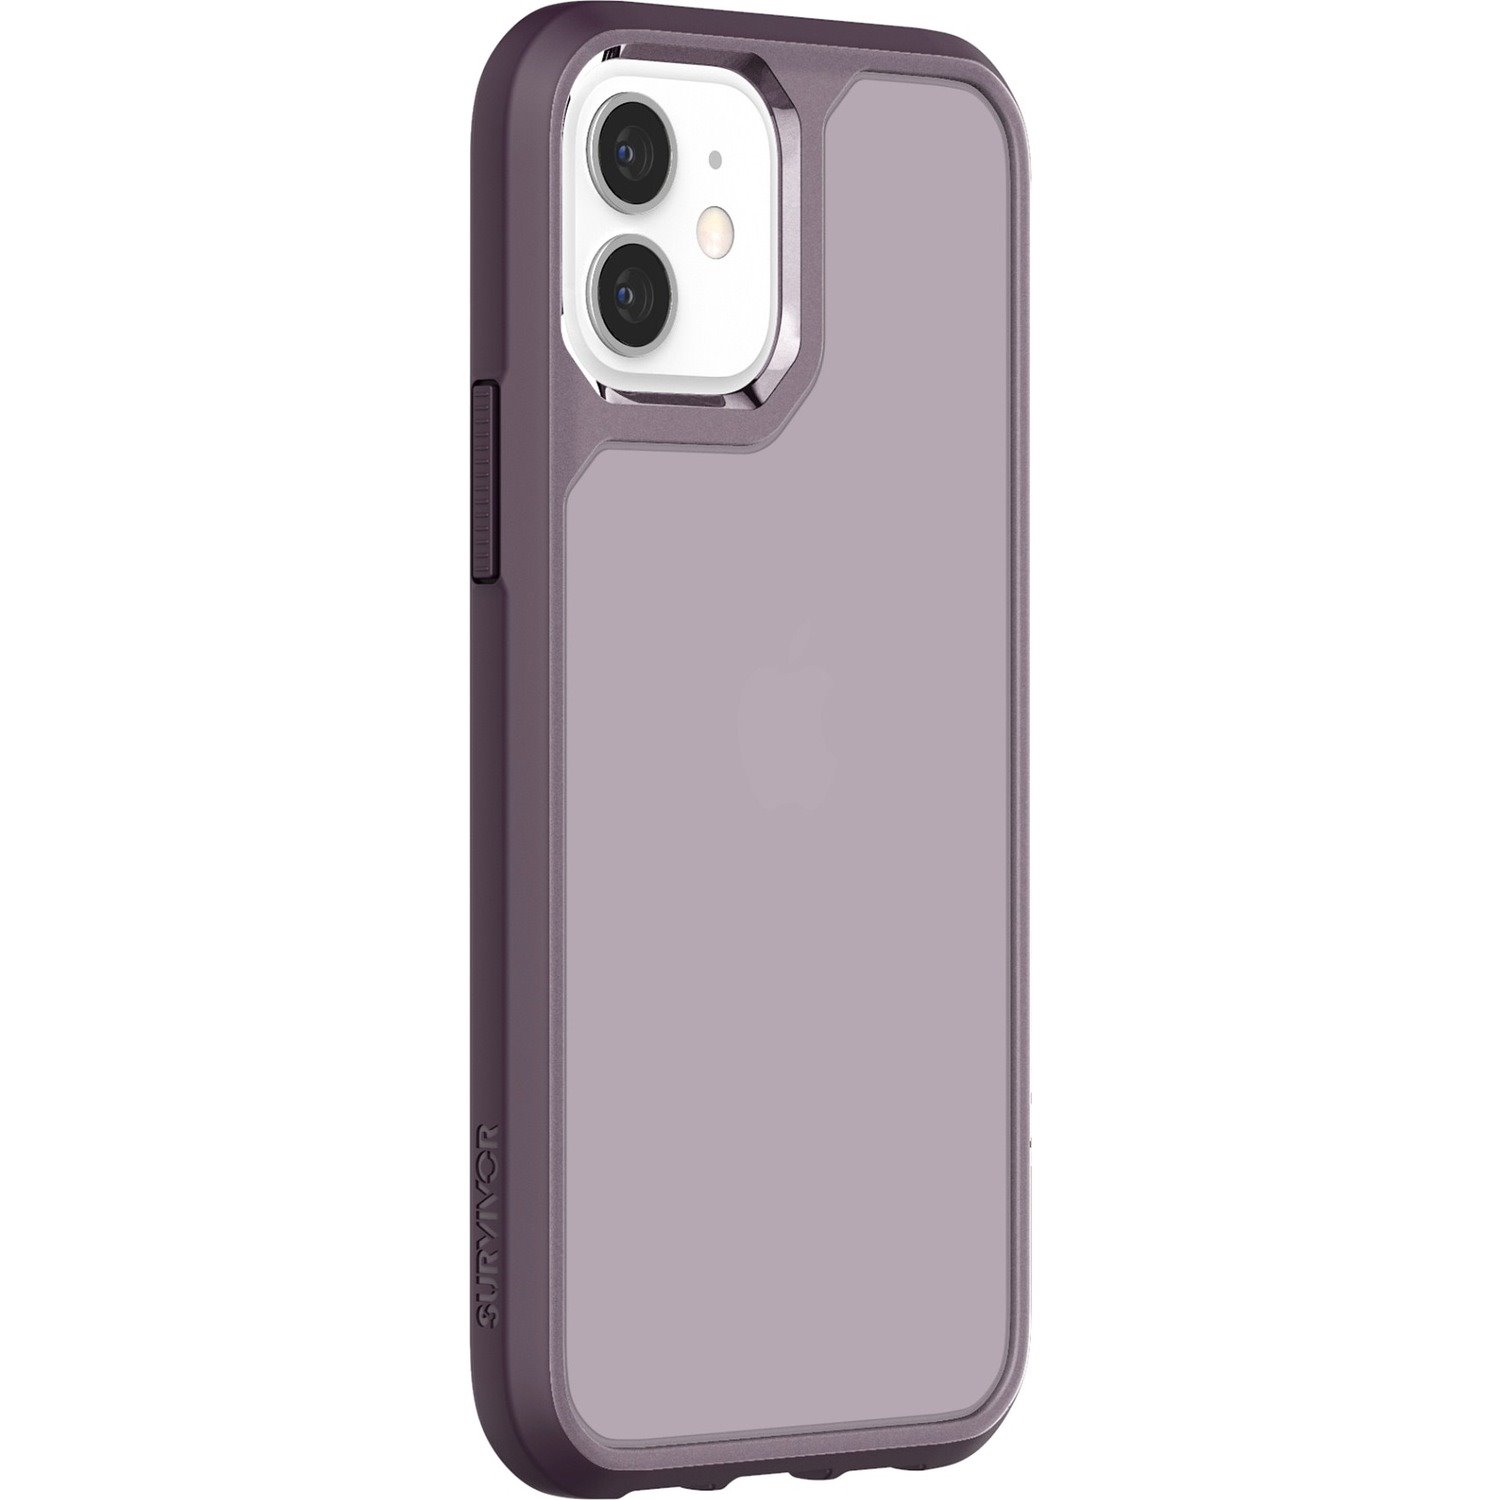 Survivor Strong Rugged Case for Apple iPhone 12, iPhone 12 Pro Smartphone - Lilac, Purple